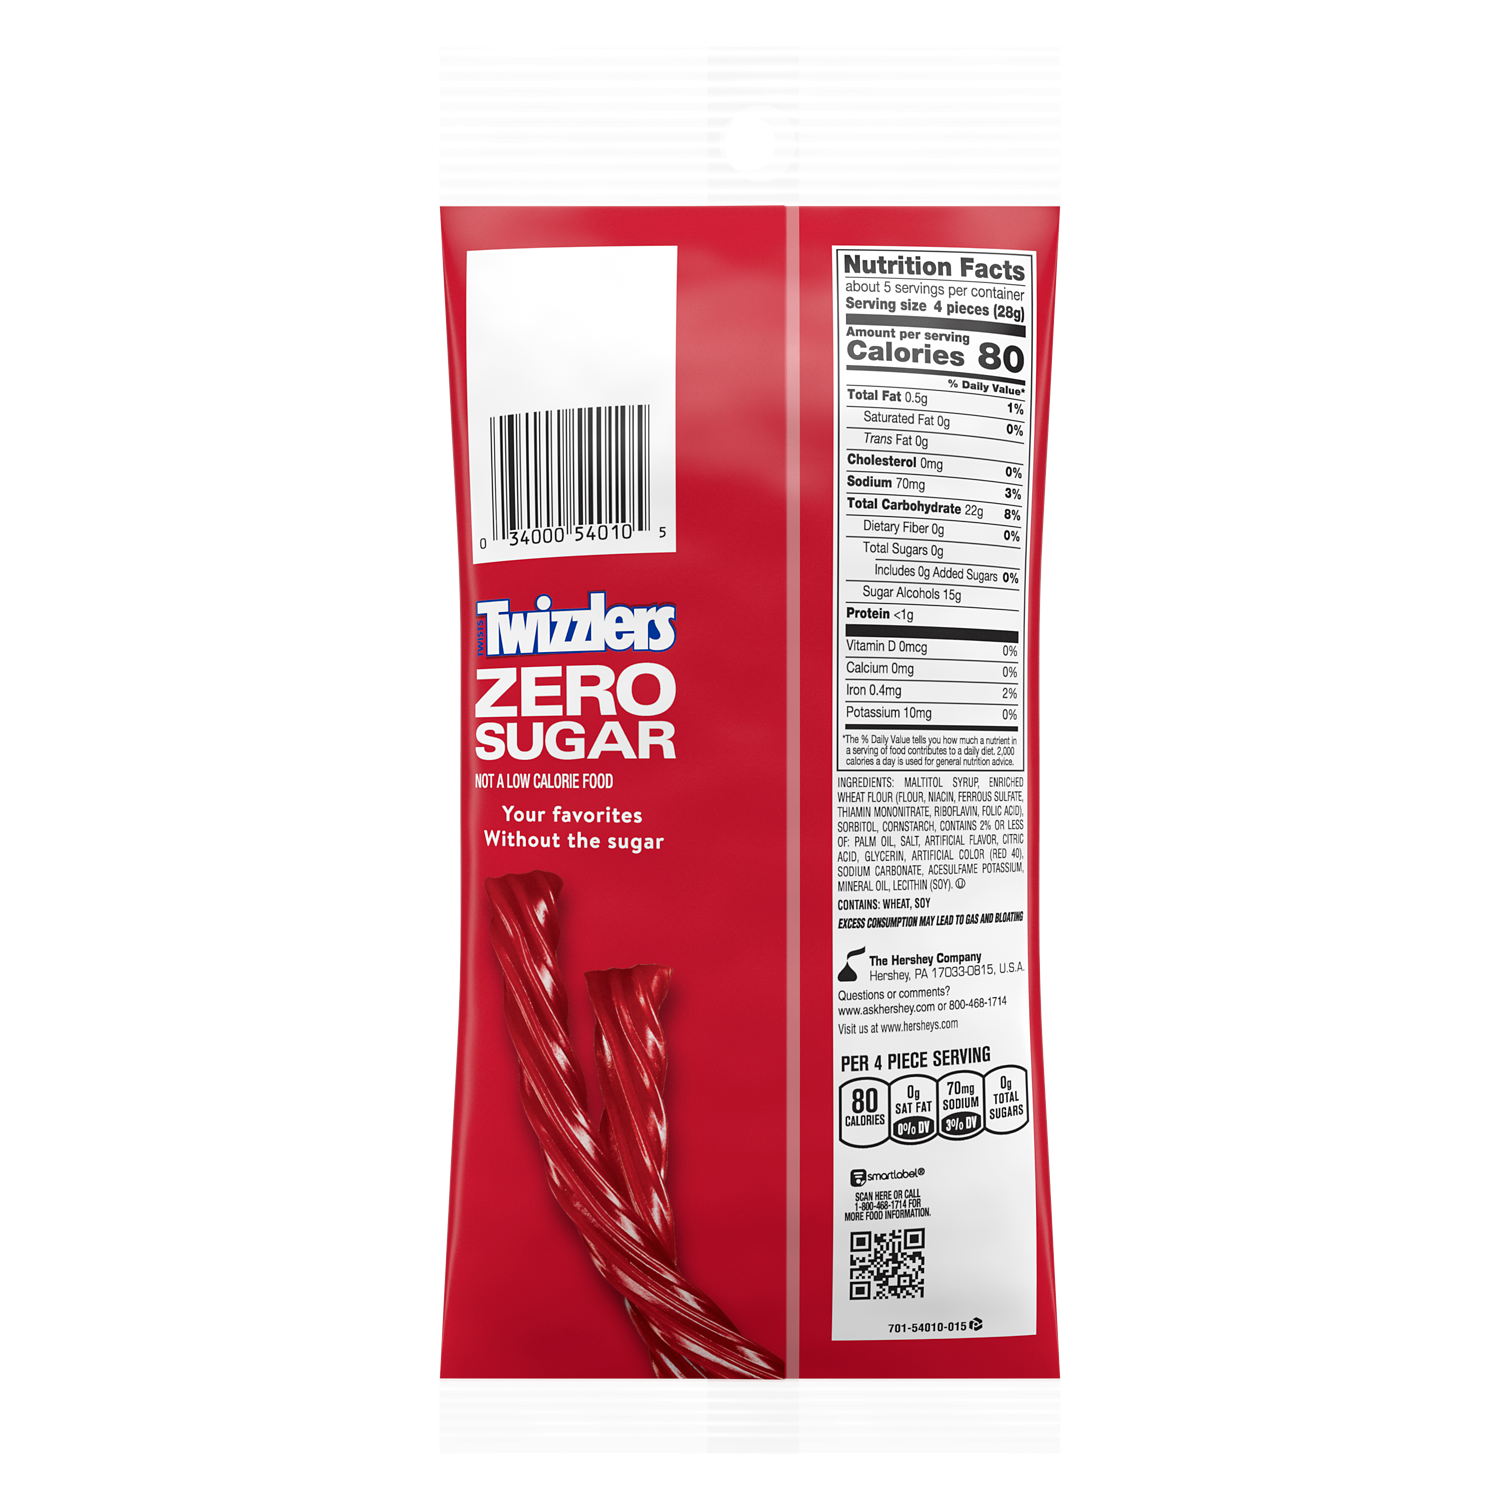 TWIZZLERS Zero Sugar Strawberry Flavored Twists, 5 oz bag - Back of Package